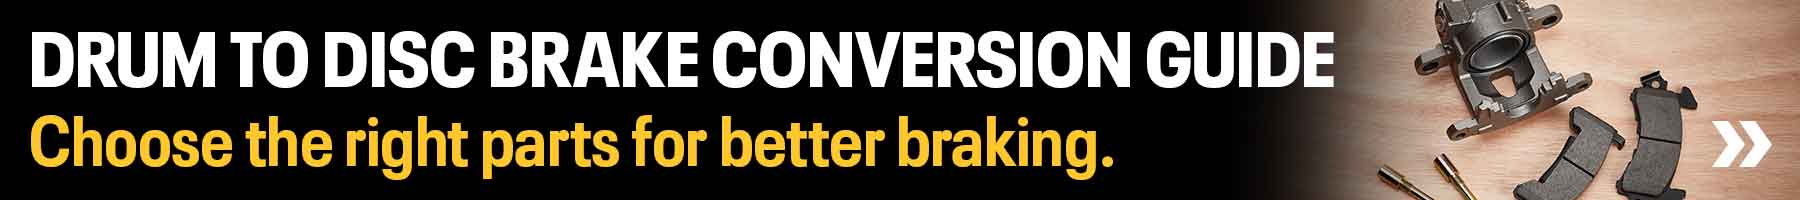 Drum to Disc Brake Conversion Guide